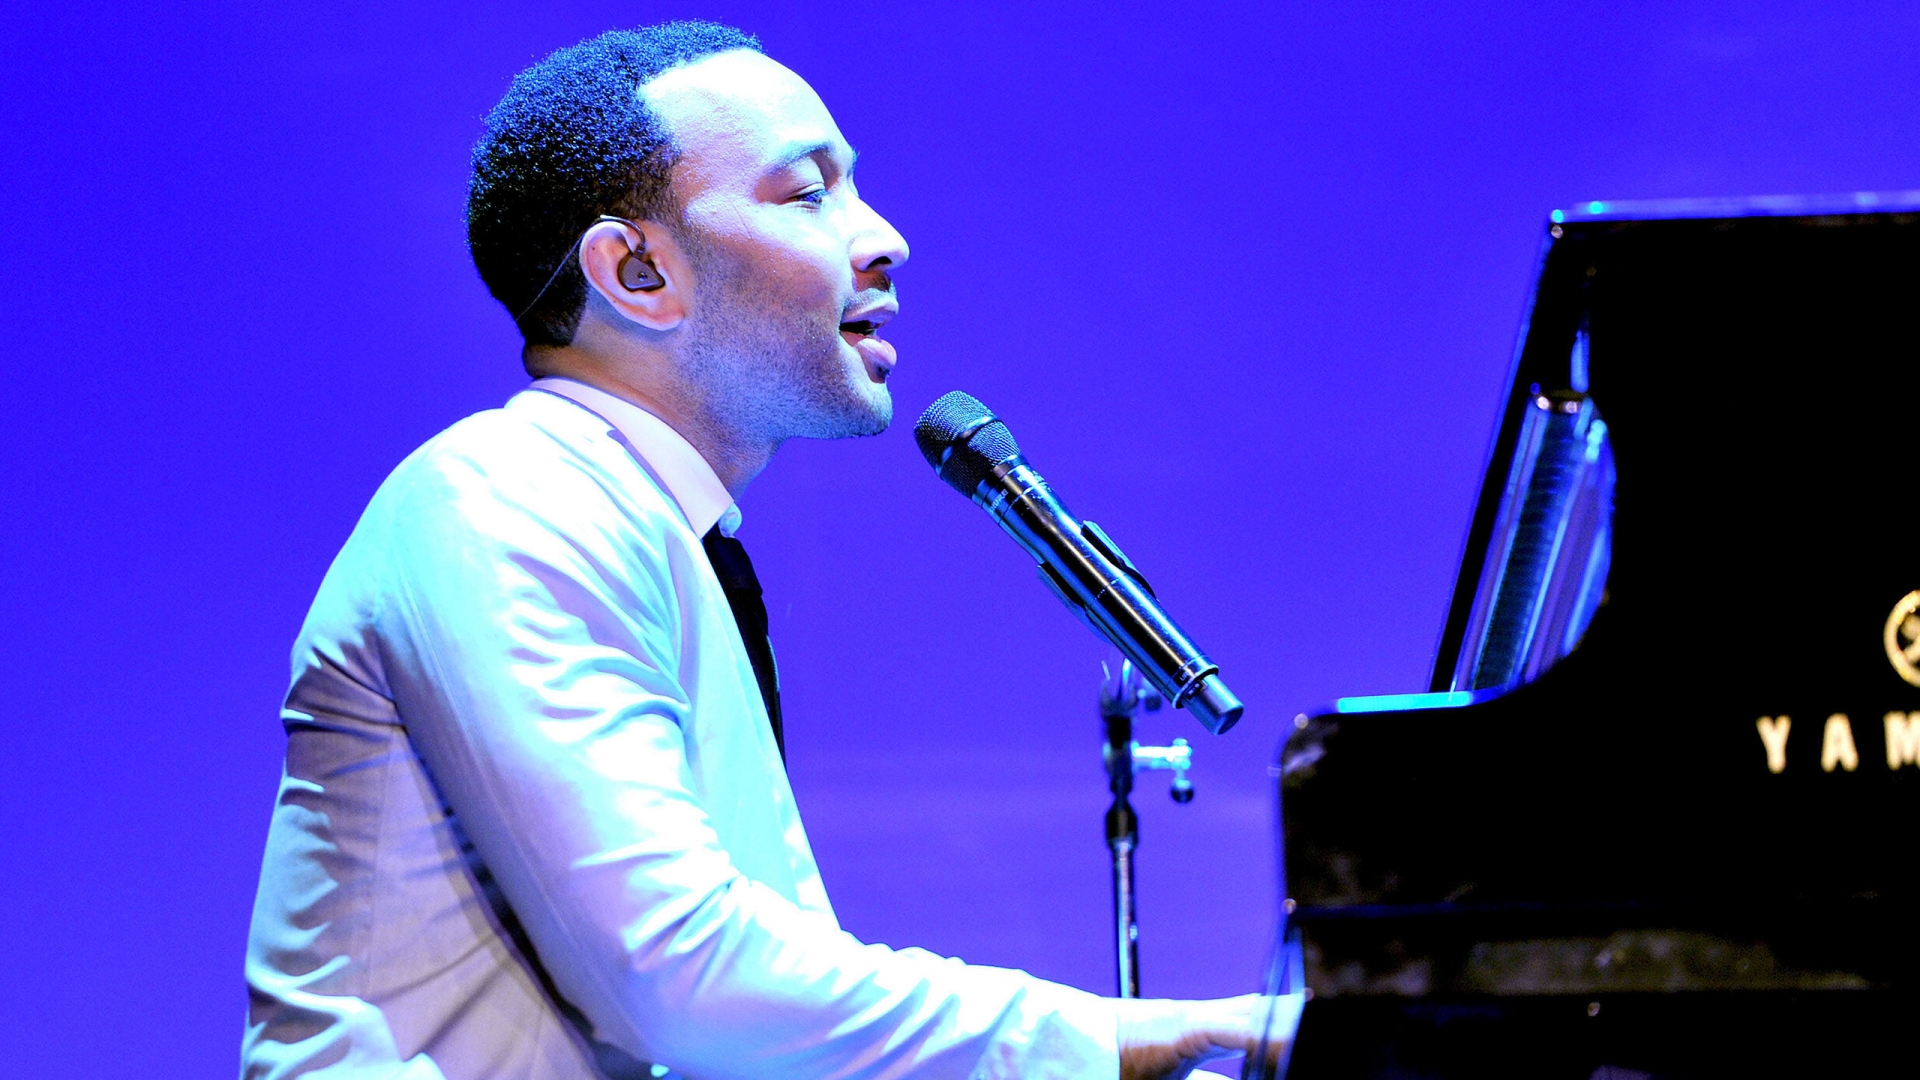 John Legend at Piano for 1920 x 1080 HDTV 1080p resolution